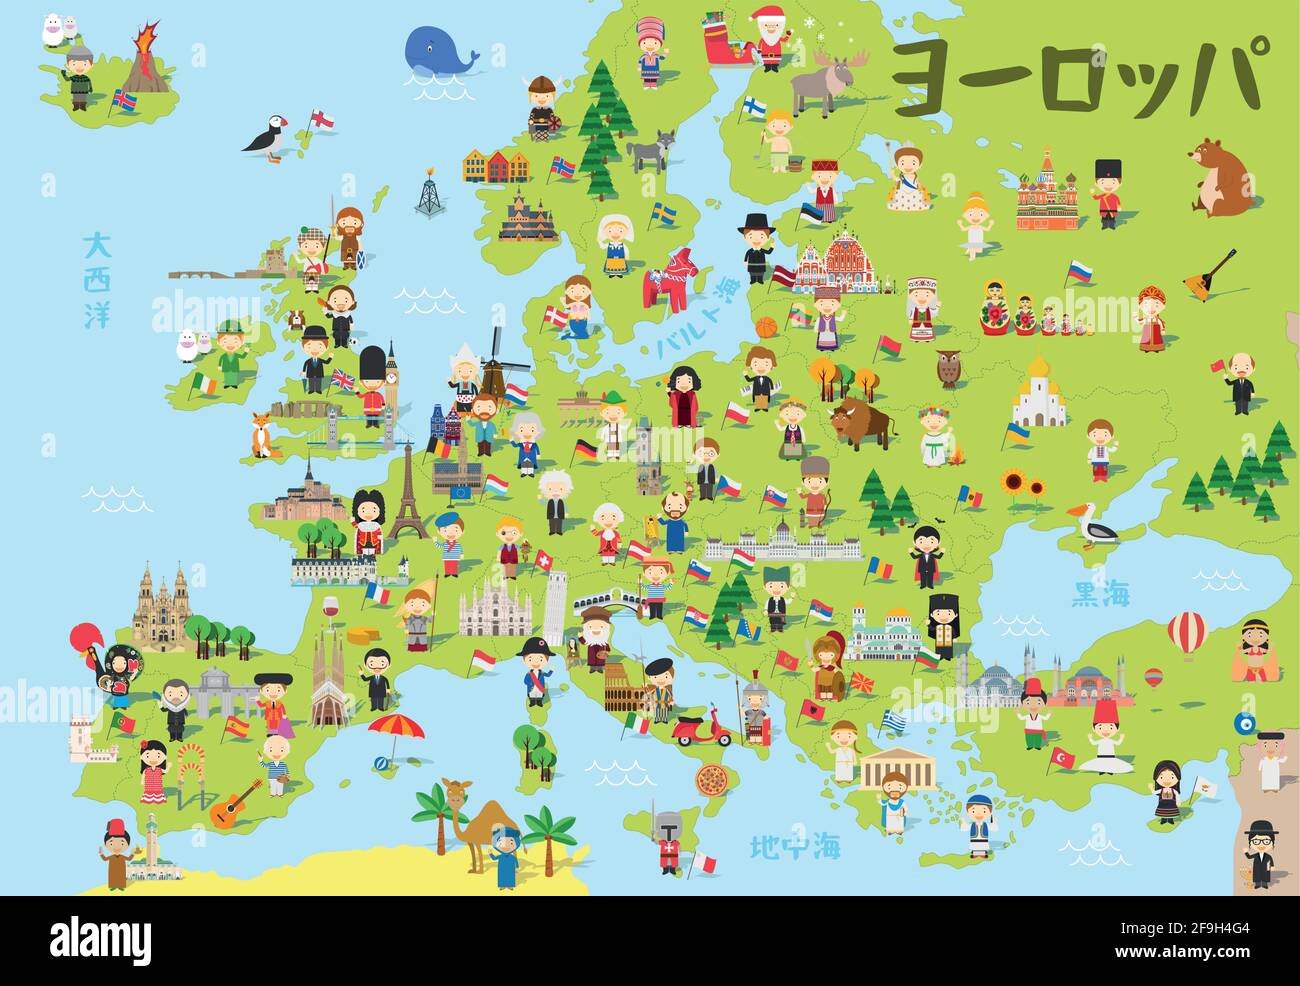 Funny cartoon map of Europe in japanese with childrens of different nationalities, representative monuments, animals and objects of all the countries. Stock Vector